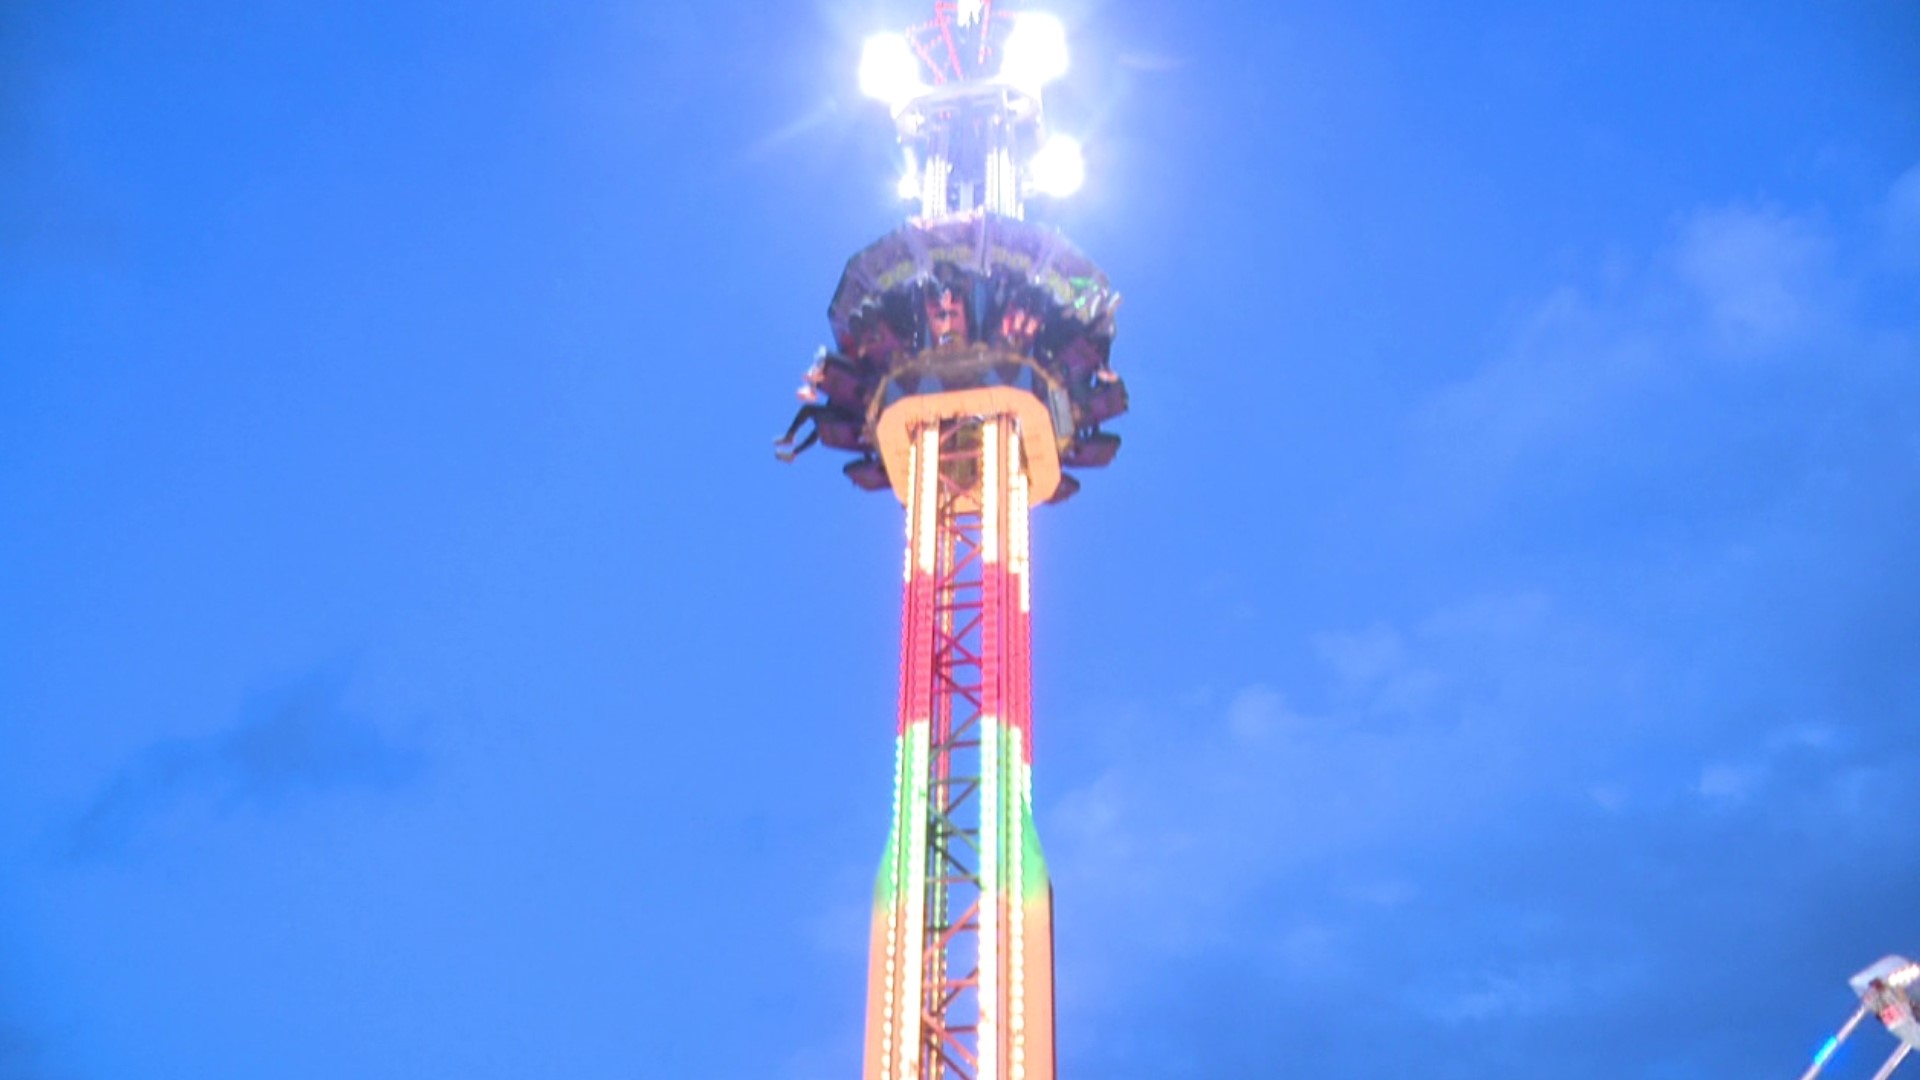 Rides and good food were dished out on opening night in Lackawanna County.